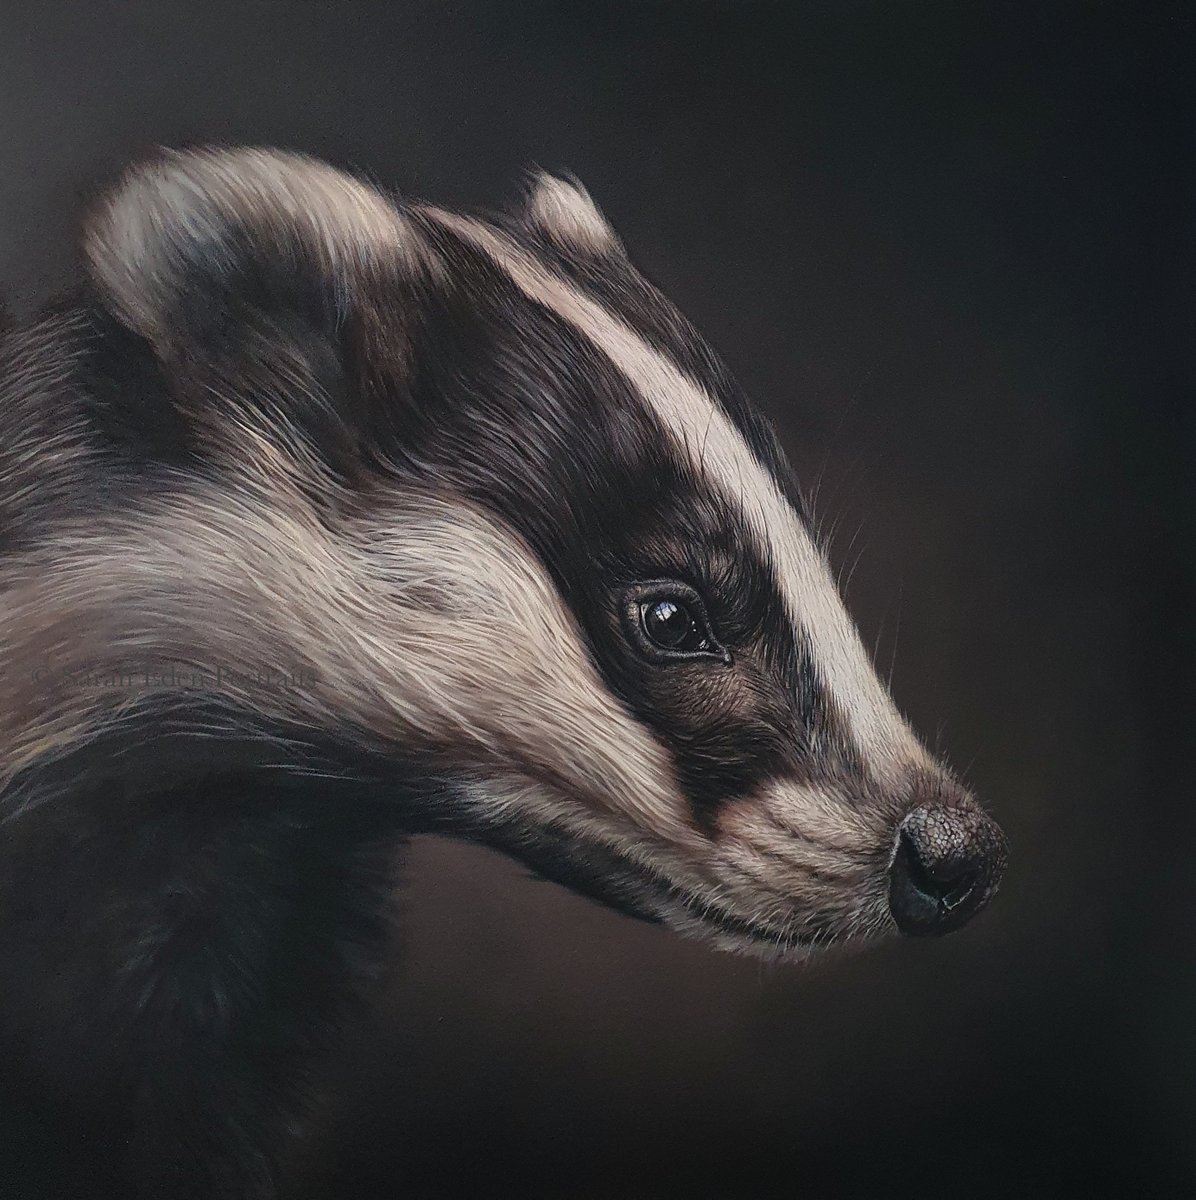 I love ending the week with a finished painting! I've been meaning to paint a badger for so long but I'm currently adding to my British Wildlife series for an upcoming exhibition so it seemed fitting to do it now. I'm stuck for a title...grateful for any suggestions? #badger